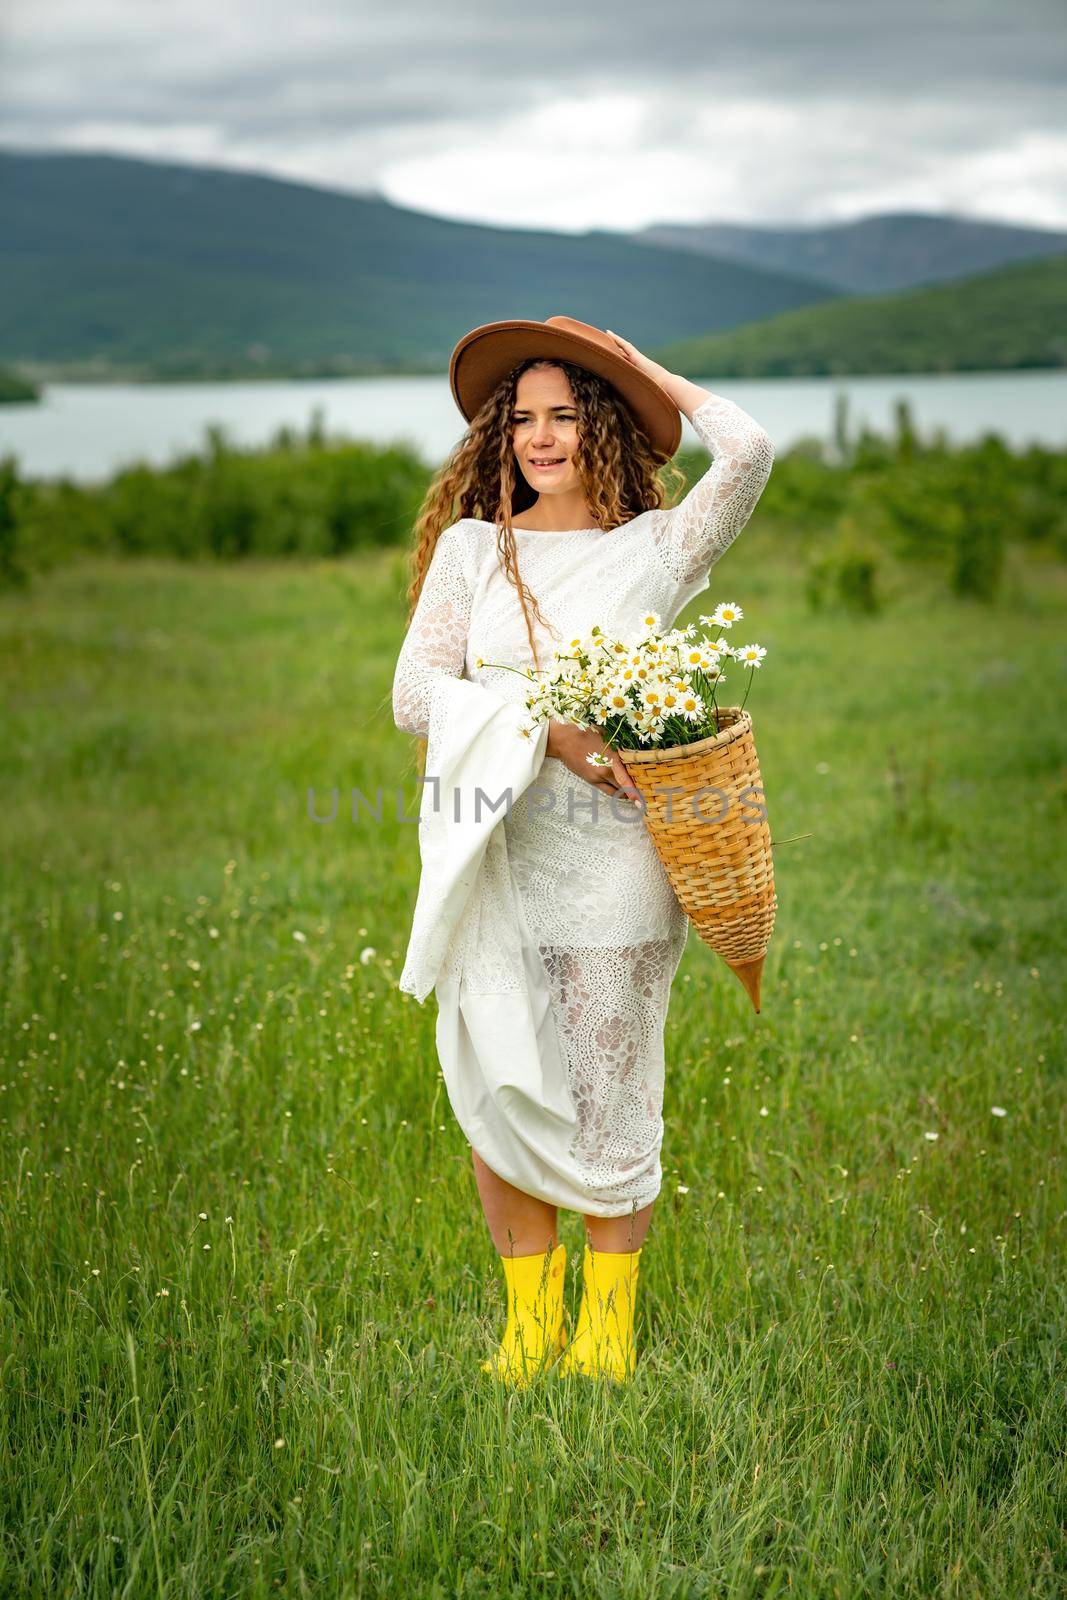 A middle-aged woman in a white dress and brown hat holds a lA middle-aged woman in a white dress and brown hat holds a basket in her hands with a large bouquet of daisies.arge bouquet of daisies in her hands. Wildflowers for congratulations by Matiunina